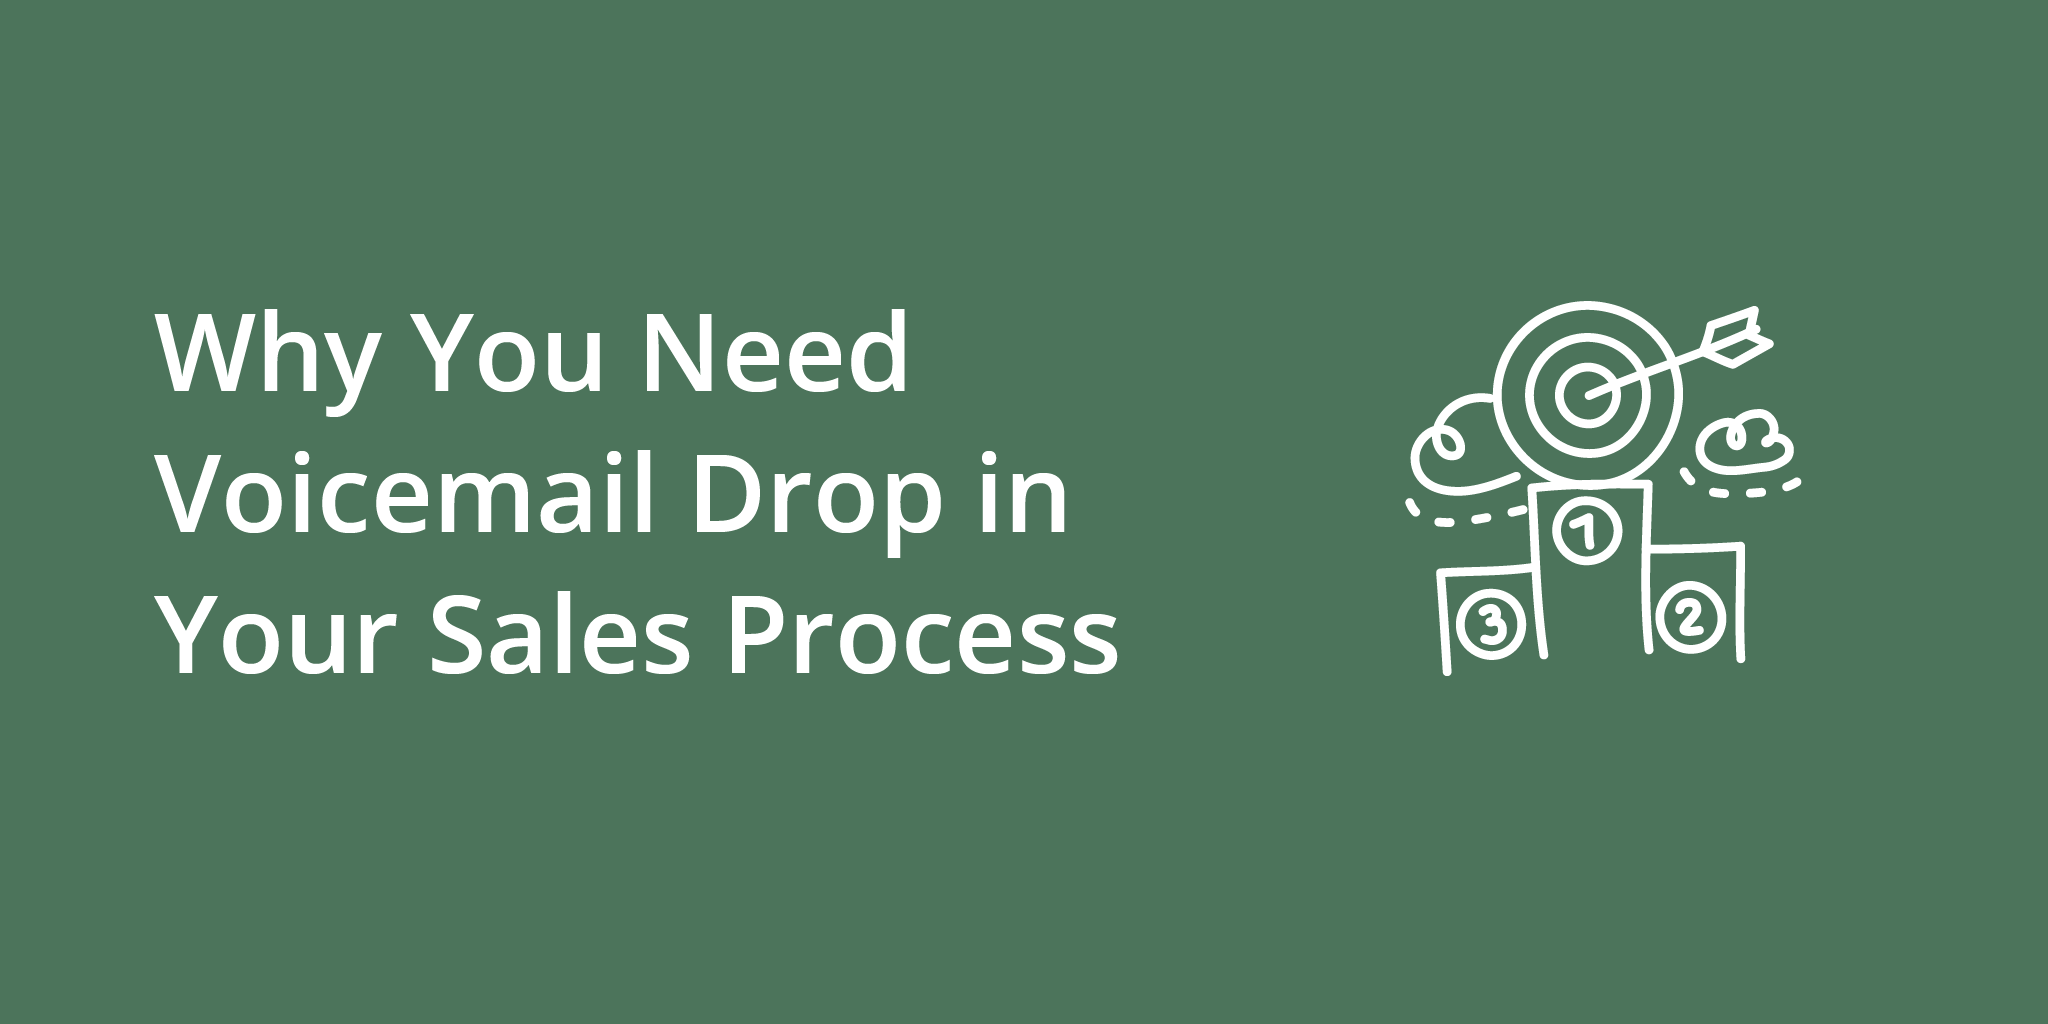 Why You Need Voicemail Drop in Your Sales Process | Telephones for business